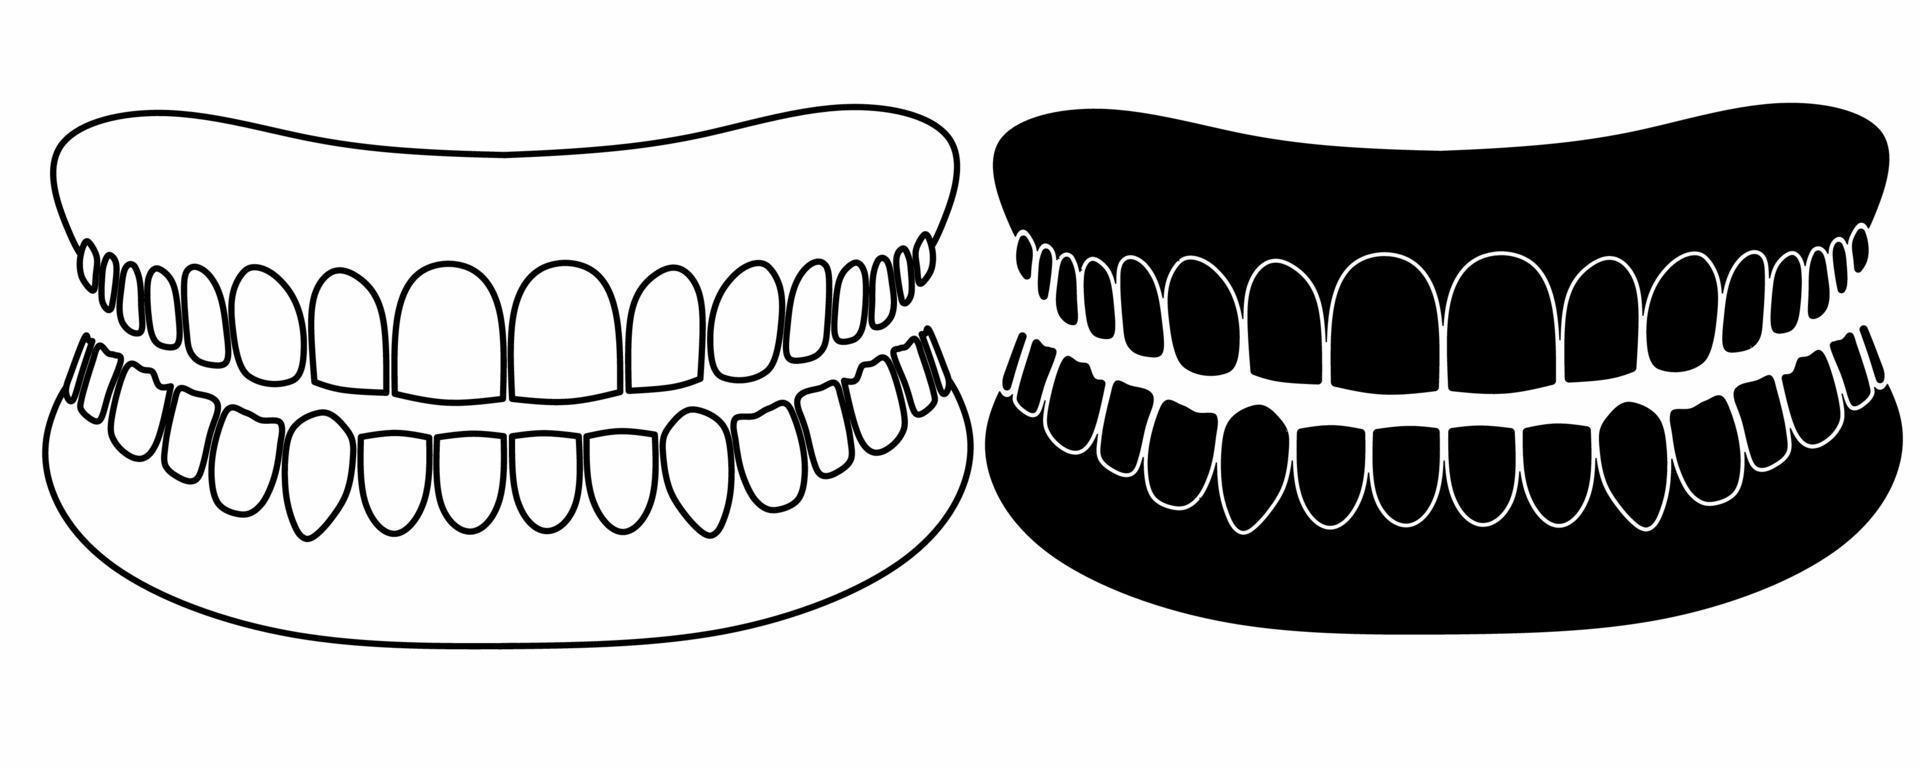 outline silhouette denture icon set isolated on white background vector